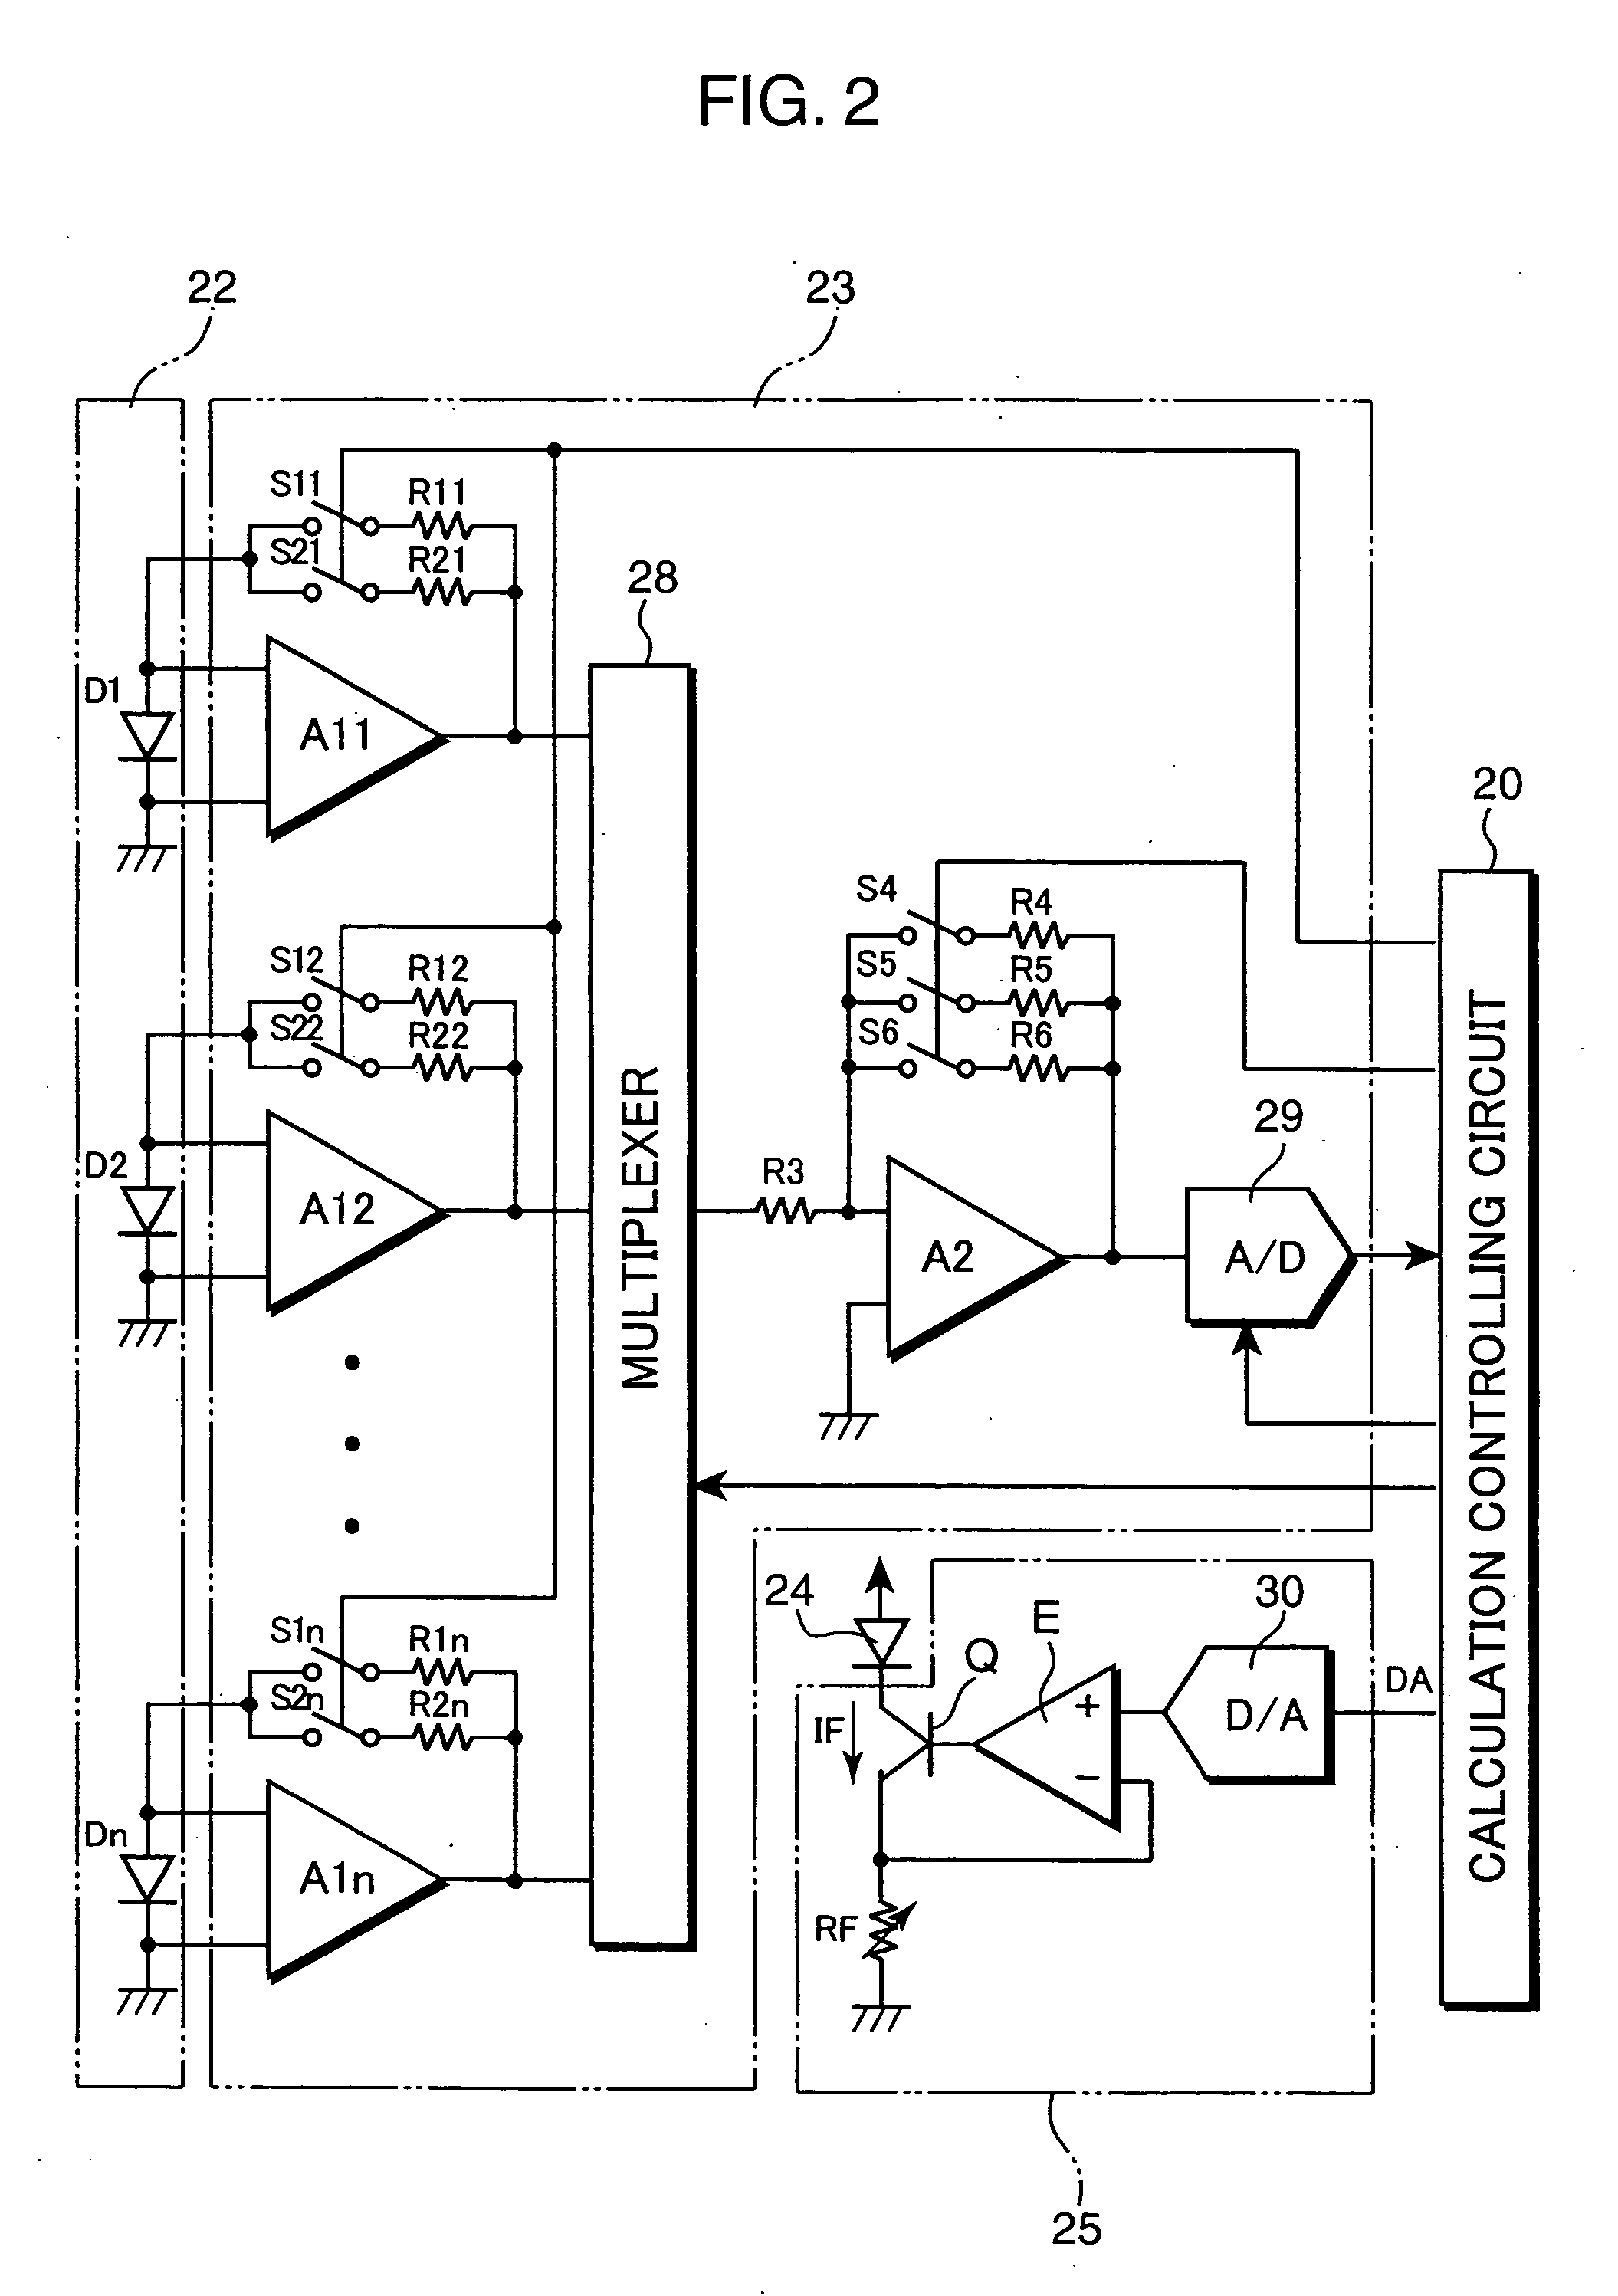 Light measuring apparatus and a method for correcting non-linearity of a light measuring apparatus